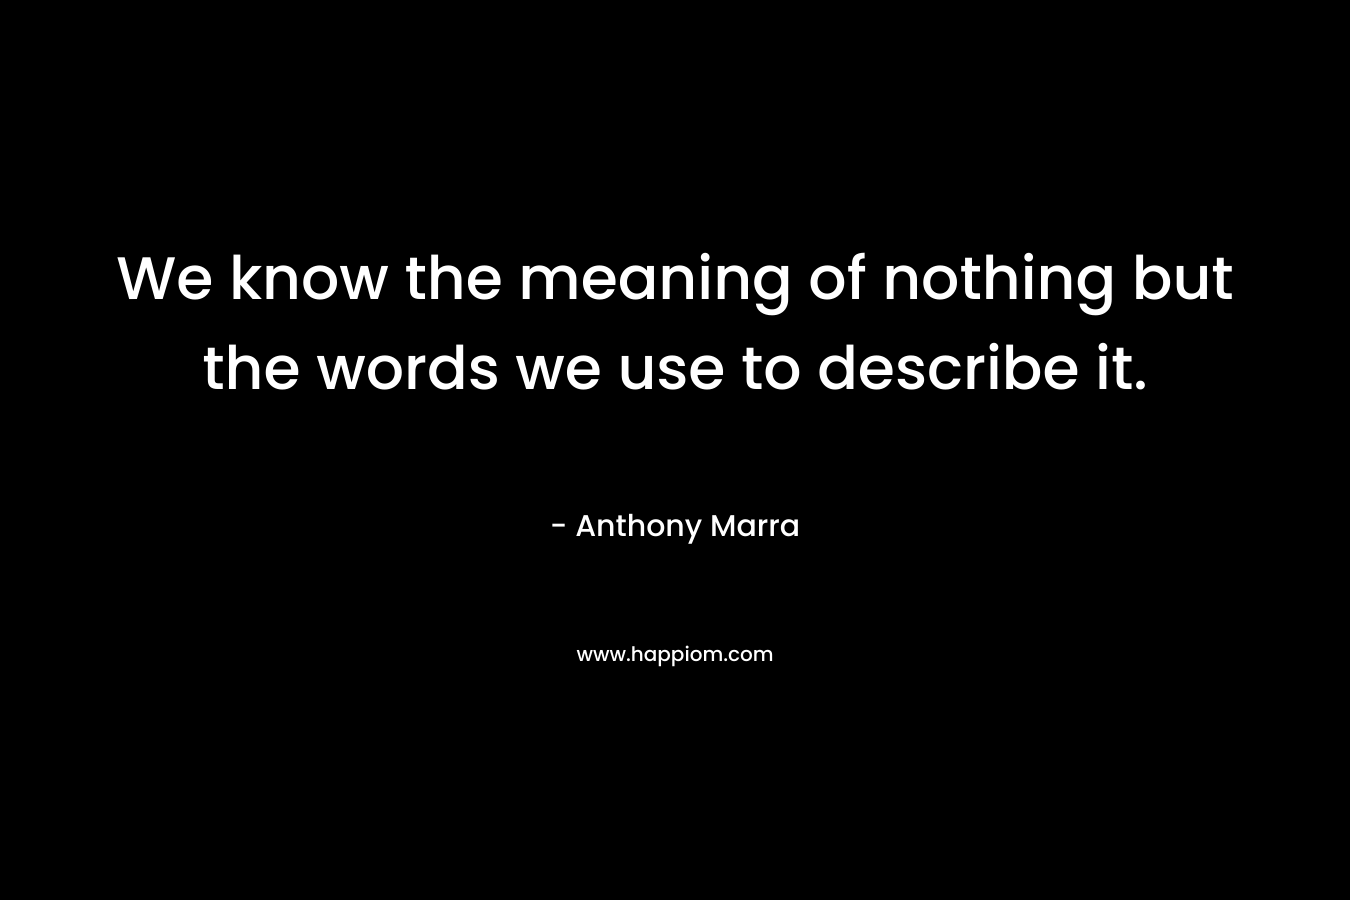 We know the meaning of nothing but the words we use to describe it. – Anthony Marra